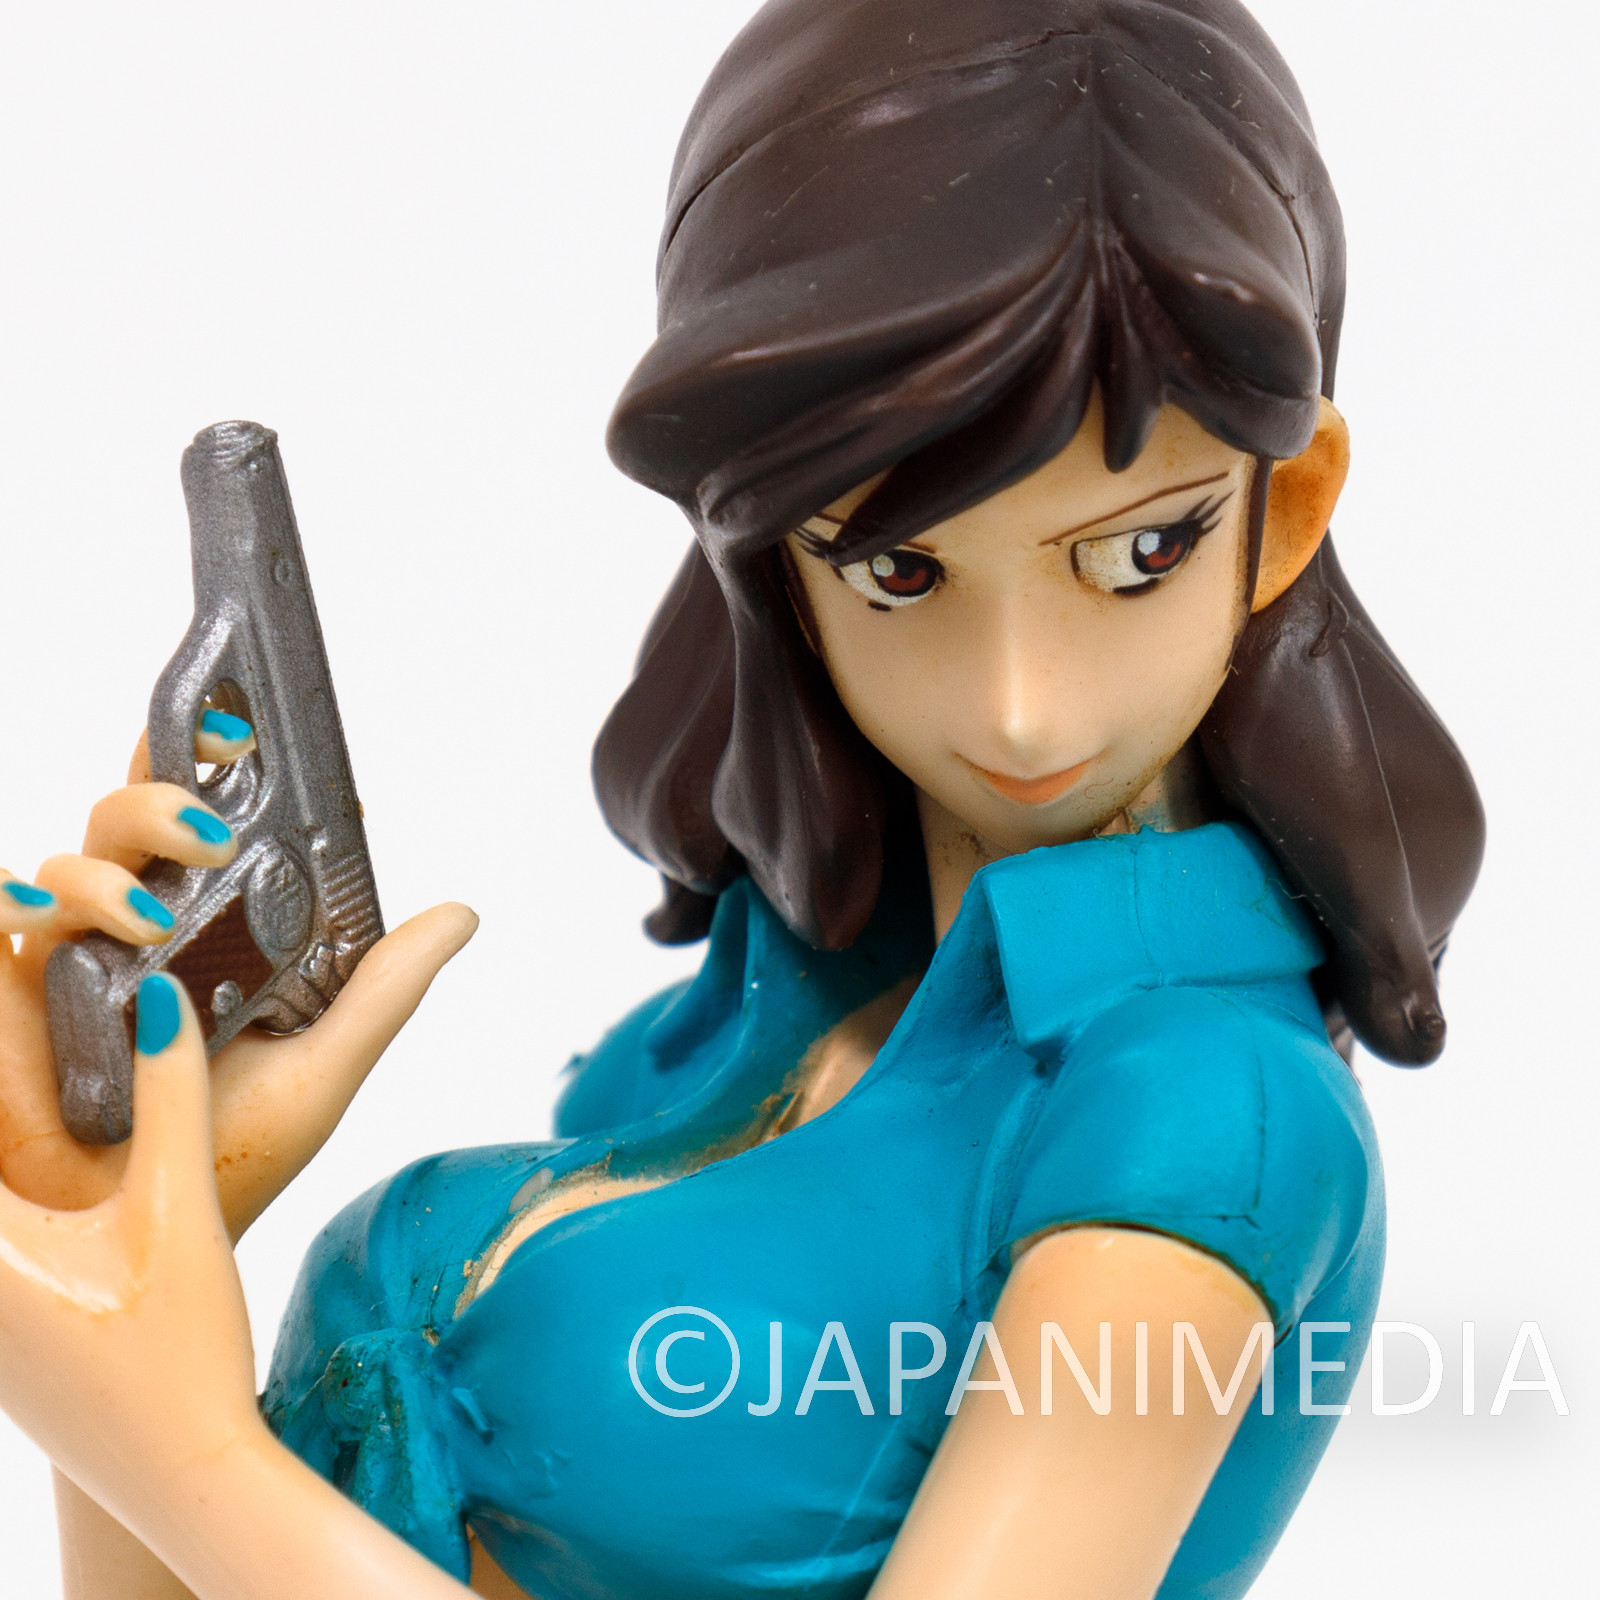 Lupin the Third (3rd) Fujiko Mine DX Figure Fashionable Collection 2 #1